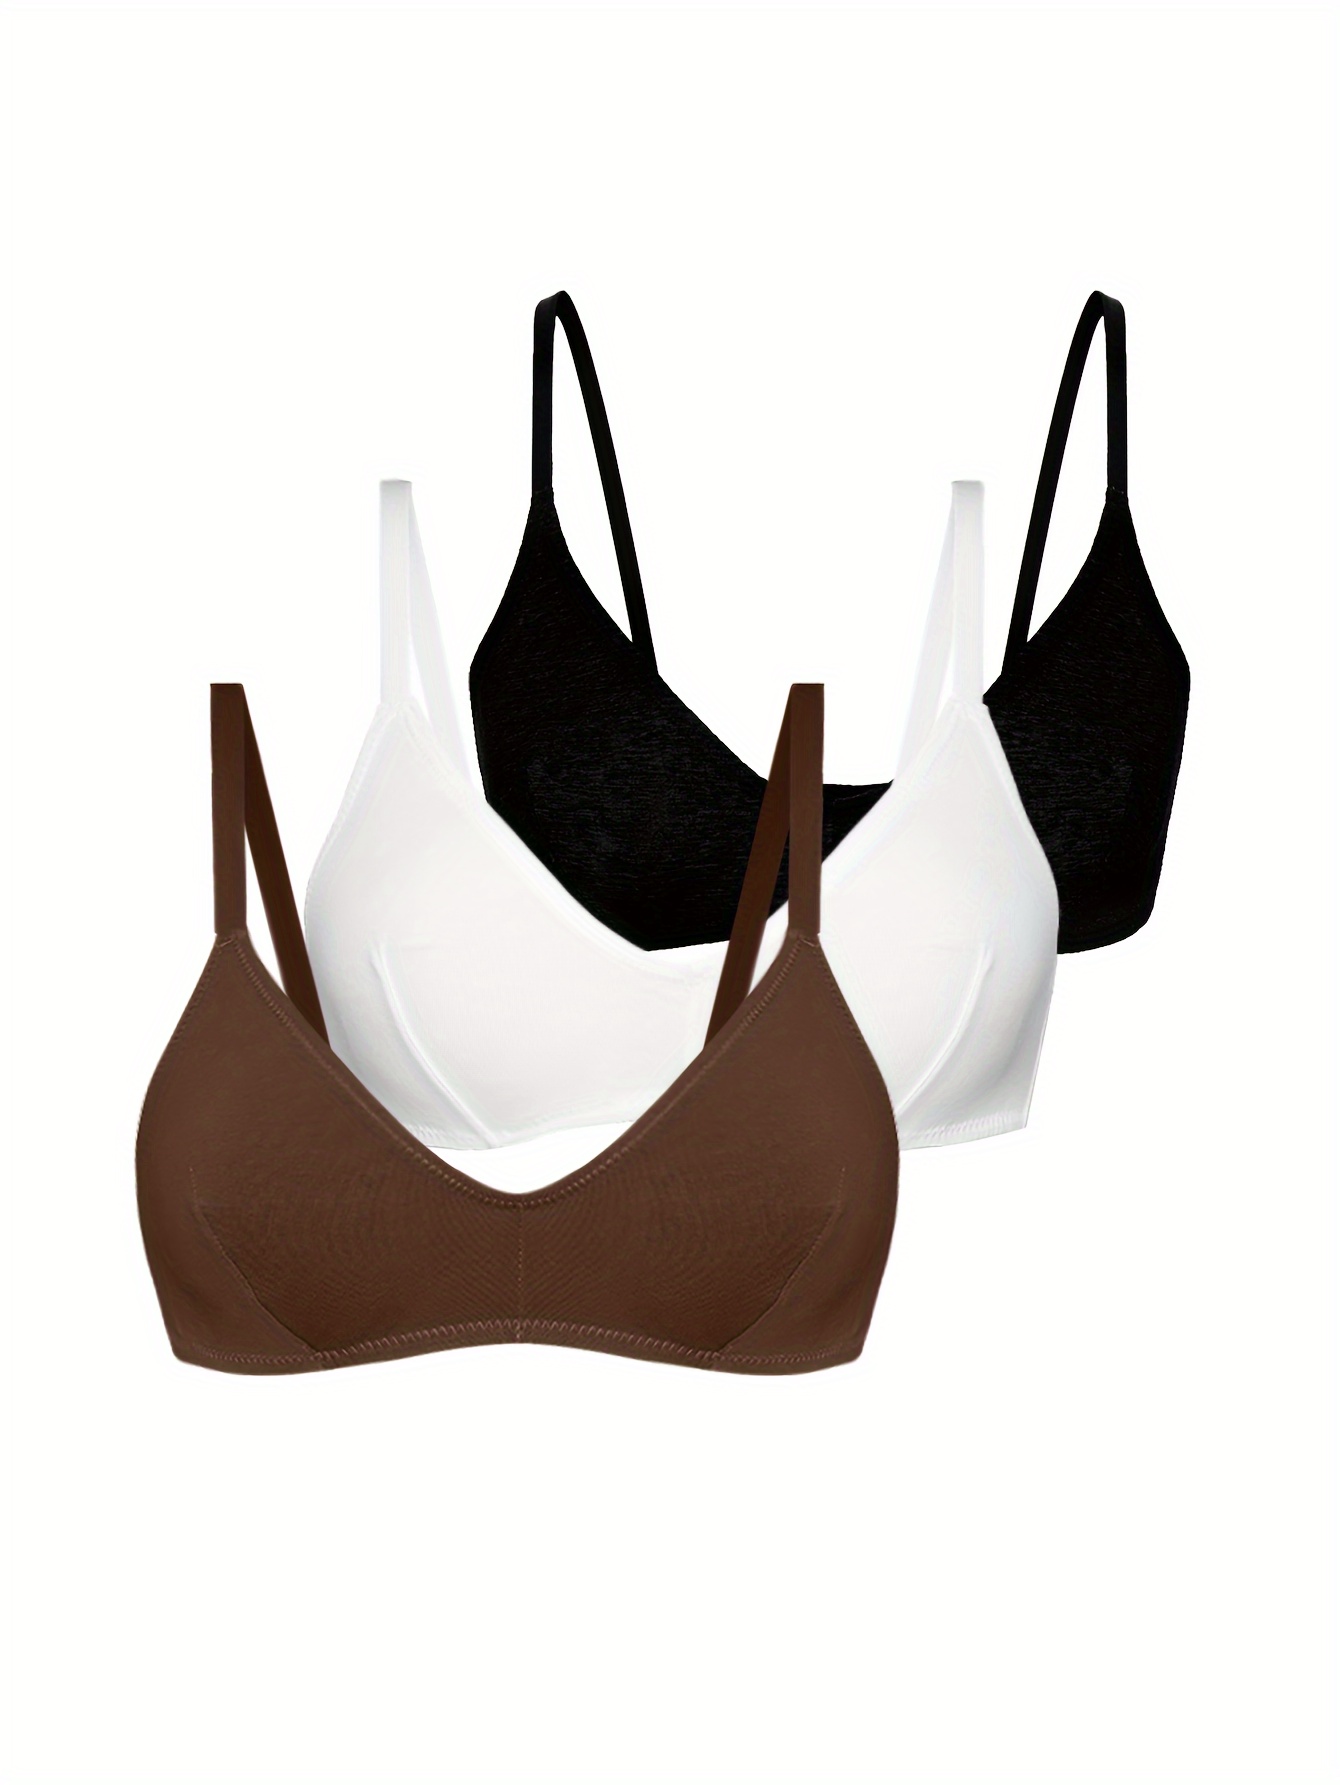 Simple Soft solid color breathable push-up wireless bra